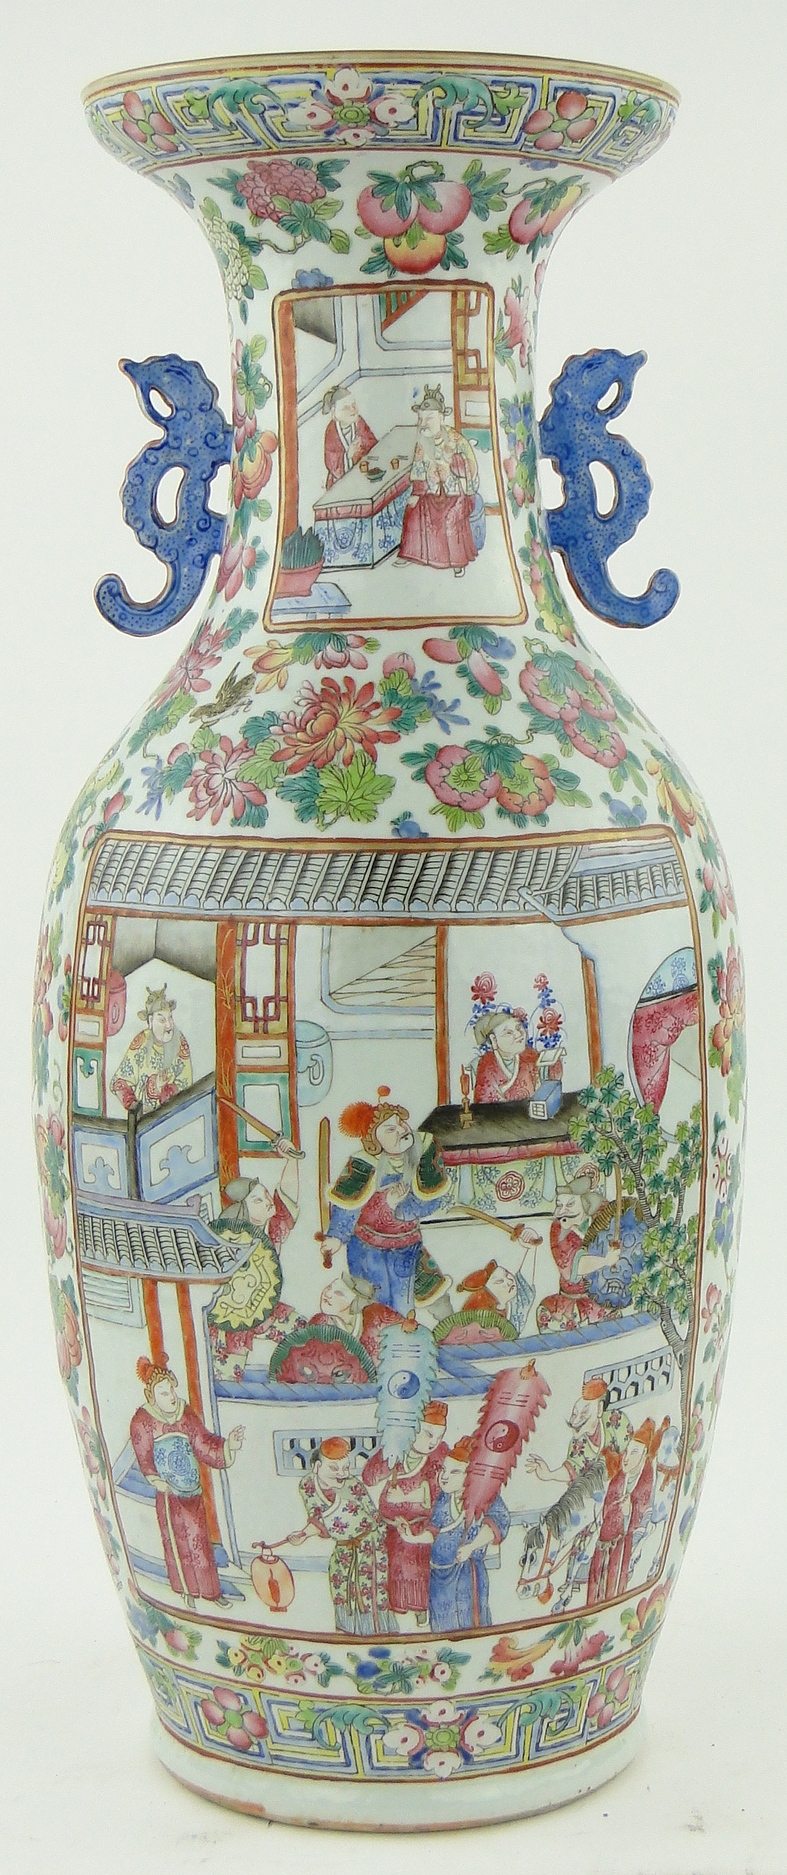 A Cantonese porcelain vase
with panels depicting figures, on butterfly and floral decorated ground,